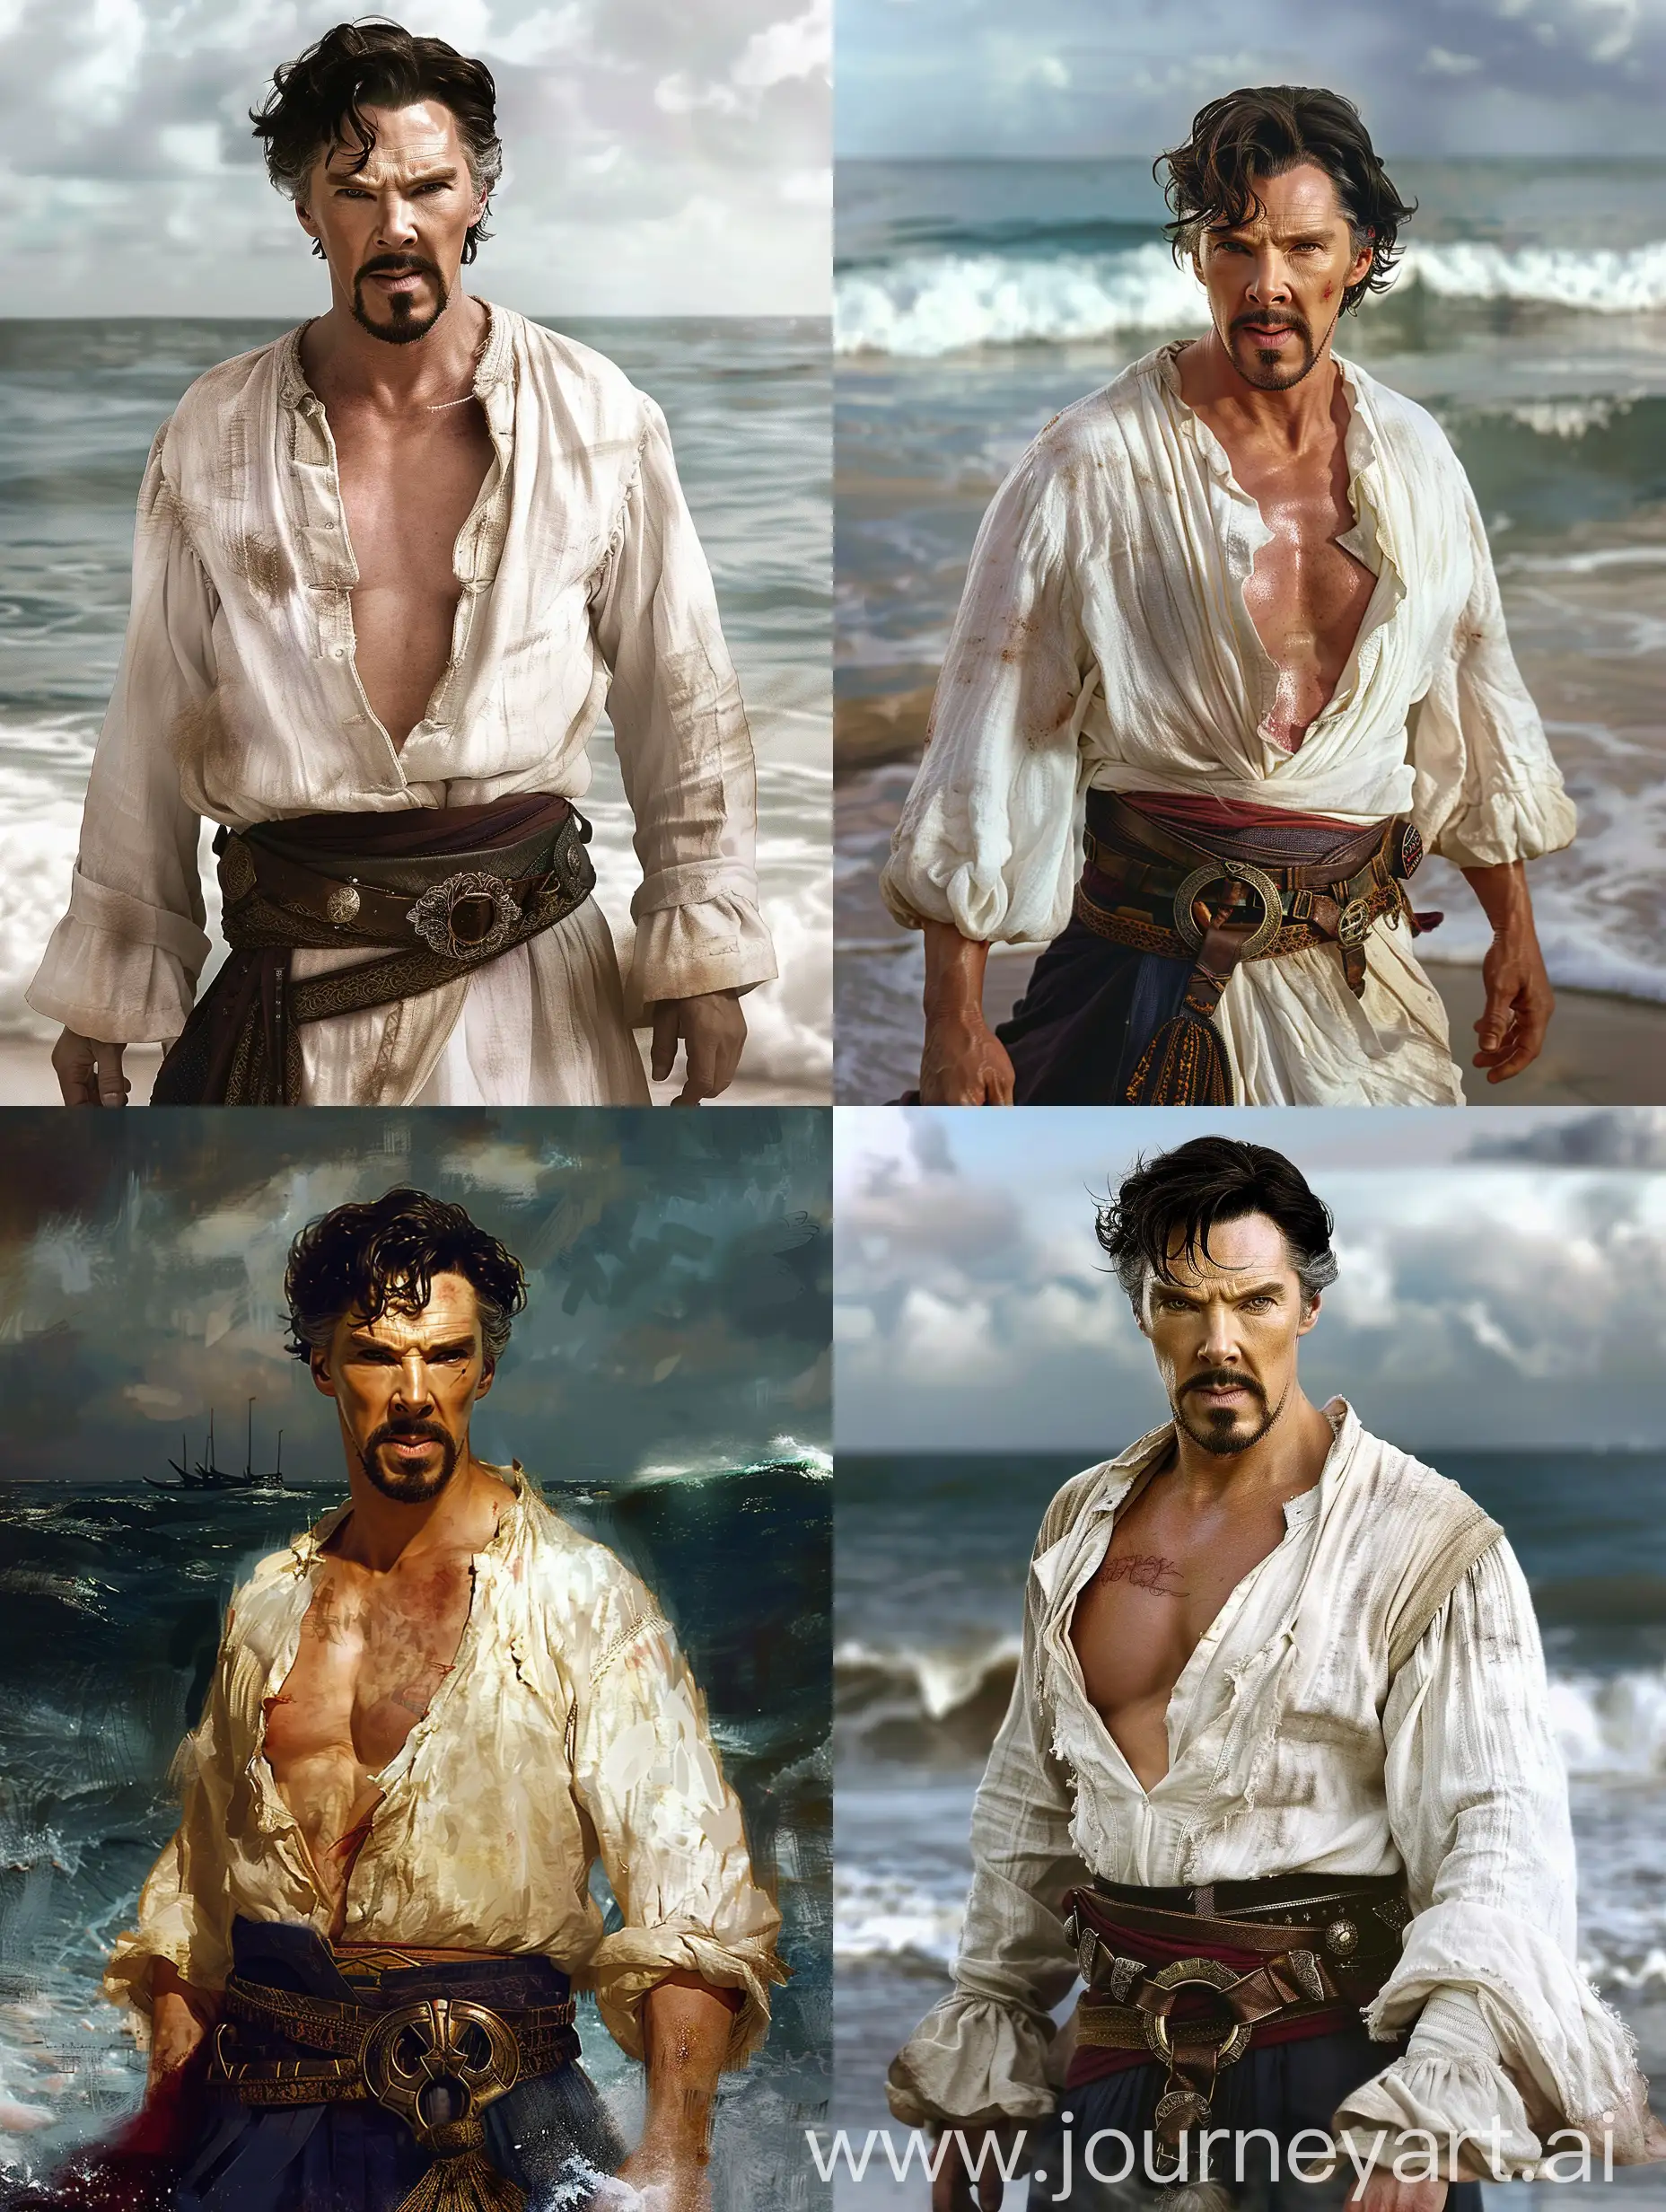 Sexy-Doctor-Strange-in-Pirate-White-Peasant-Shirt-by-the-Sea